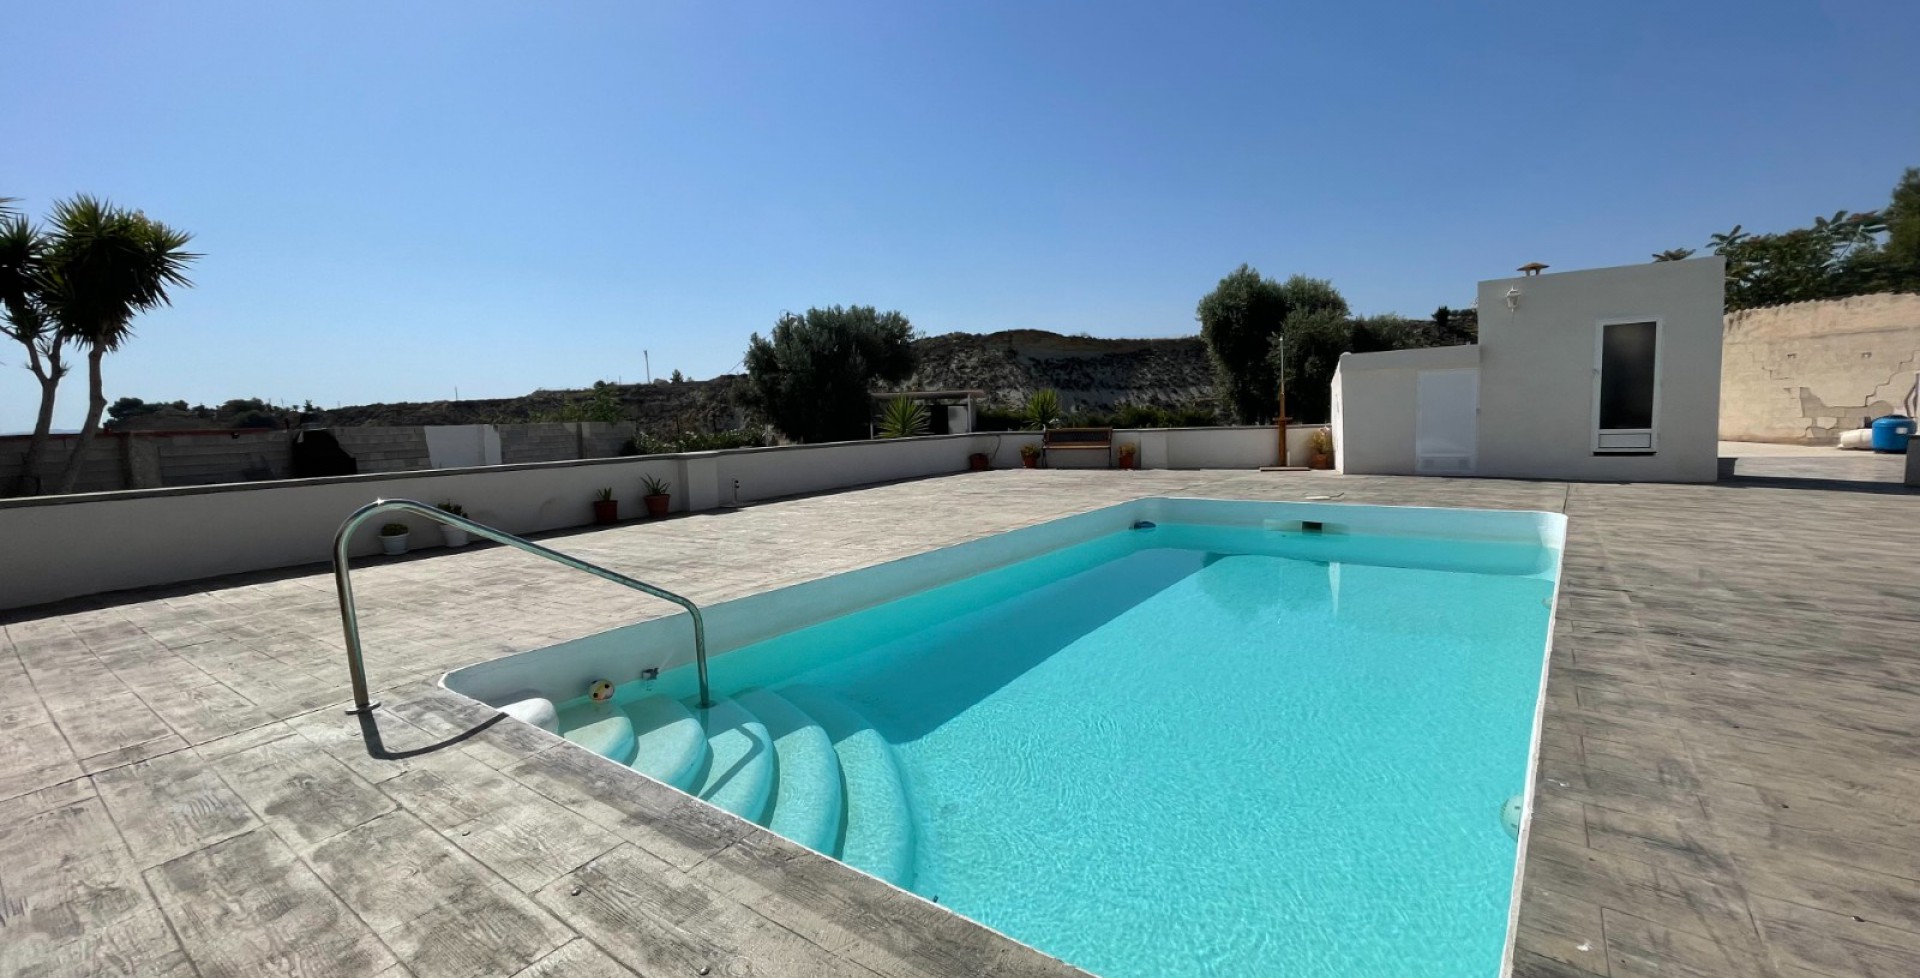 Modern villa with amazing swimming pool and fantastic views Archena, Murcia, Spain